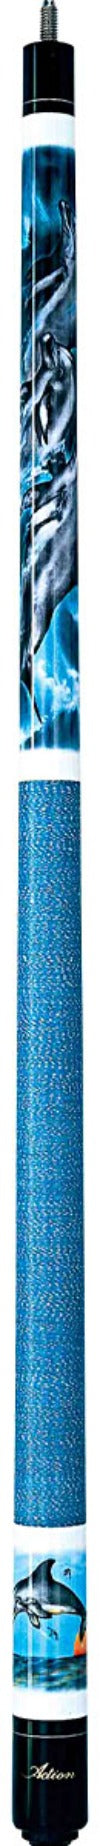 Action Action ADV59 Pool Cue Pool Cue